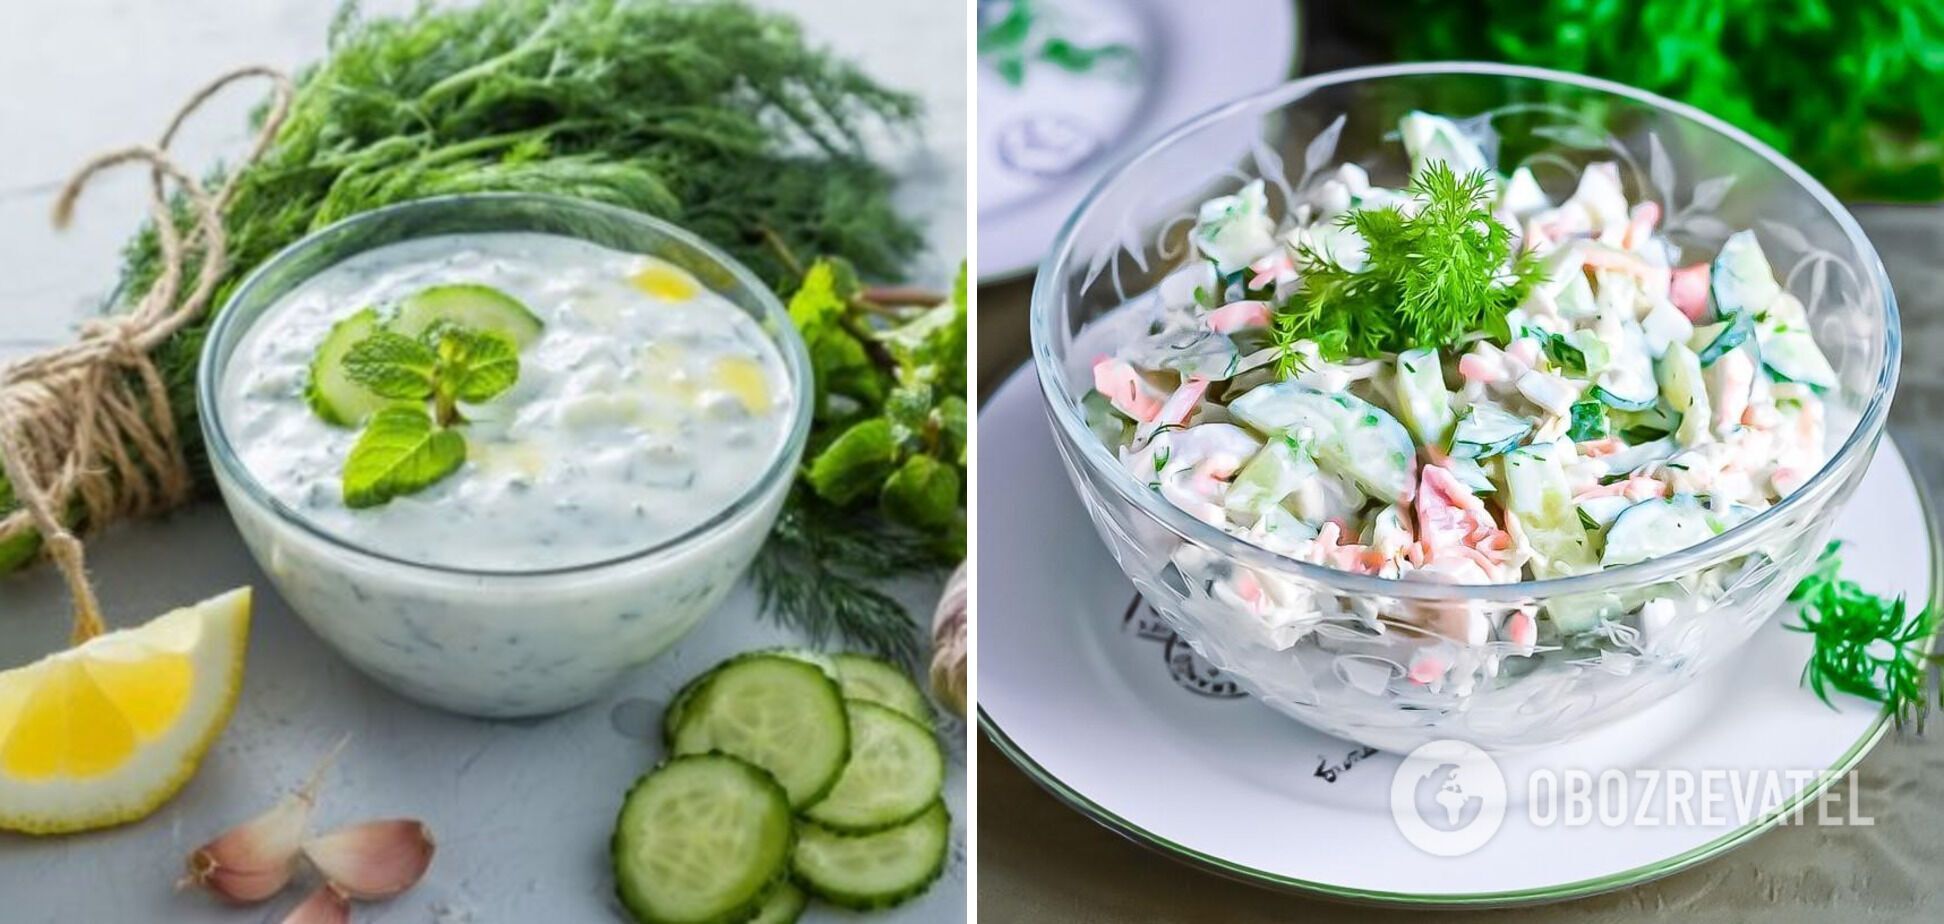 How to cook delicious okroshka at home